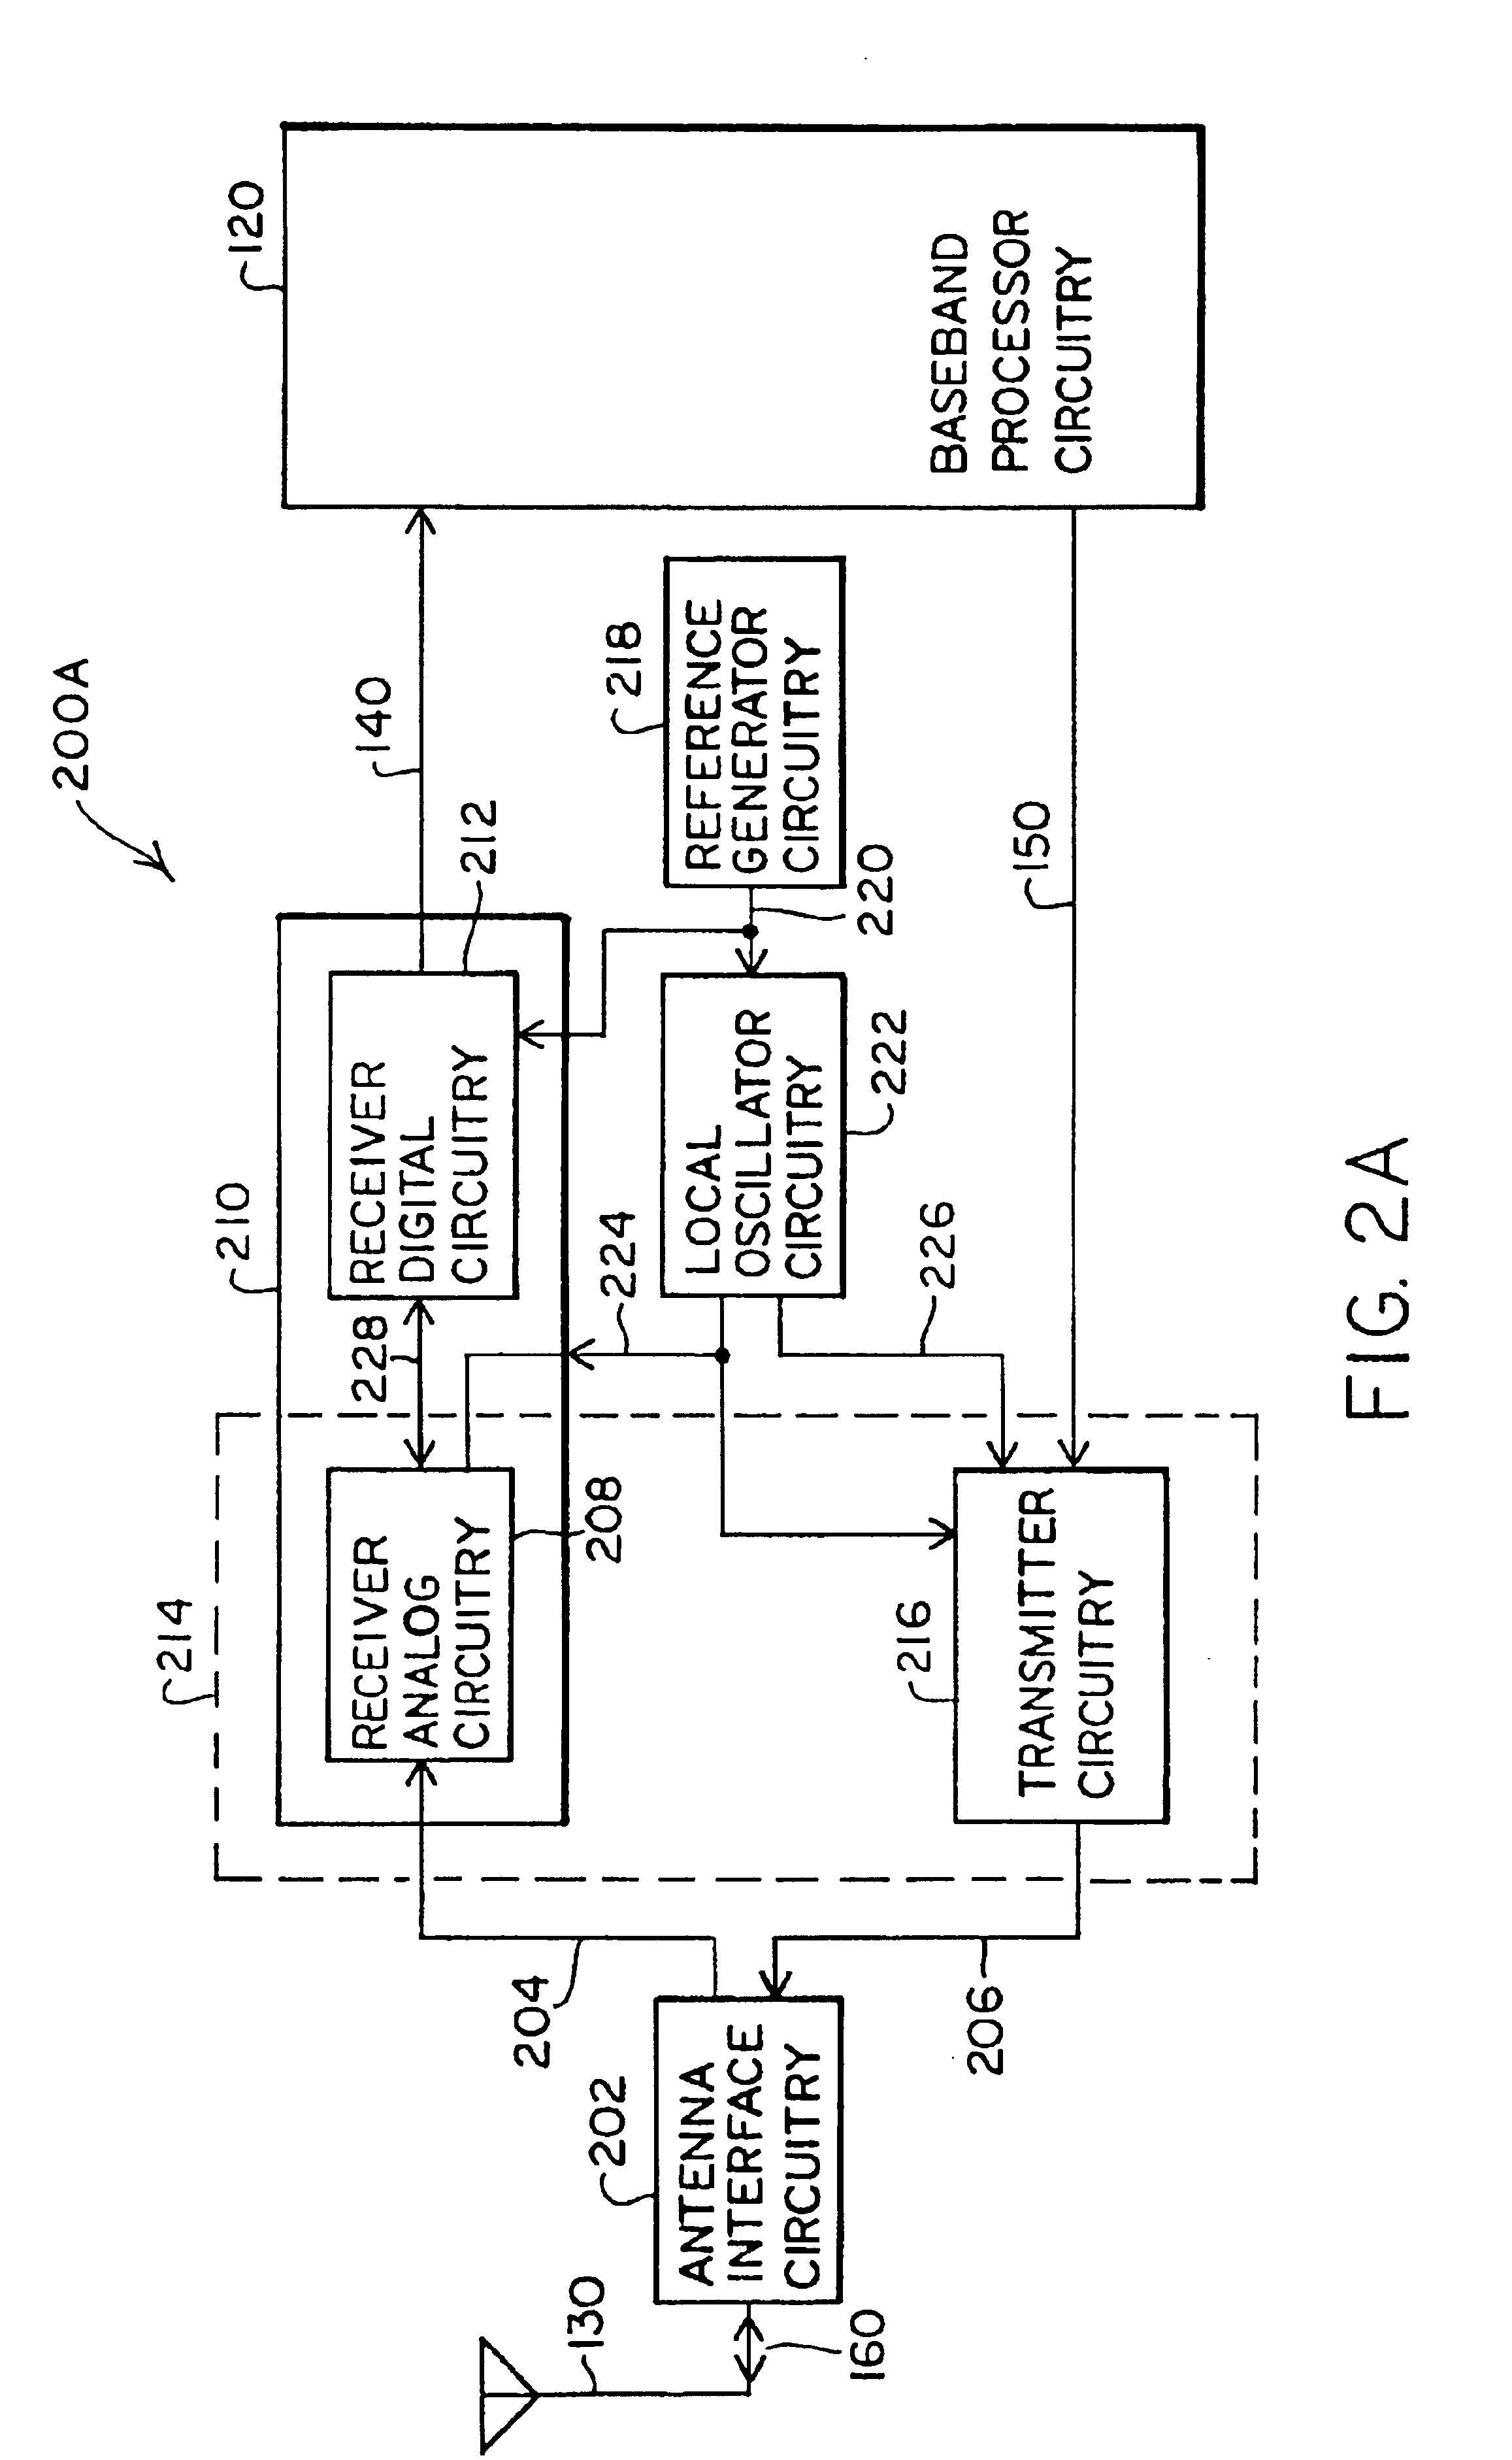 Digital architecture for radio-frequency apparatus and associated methods